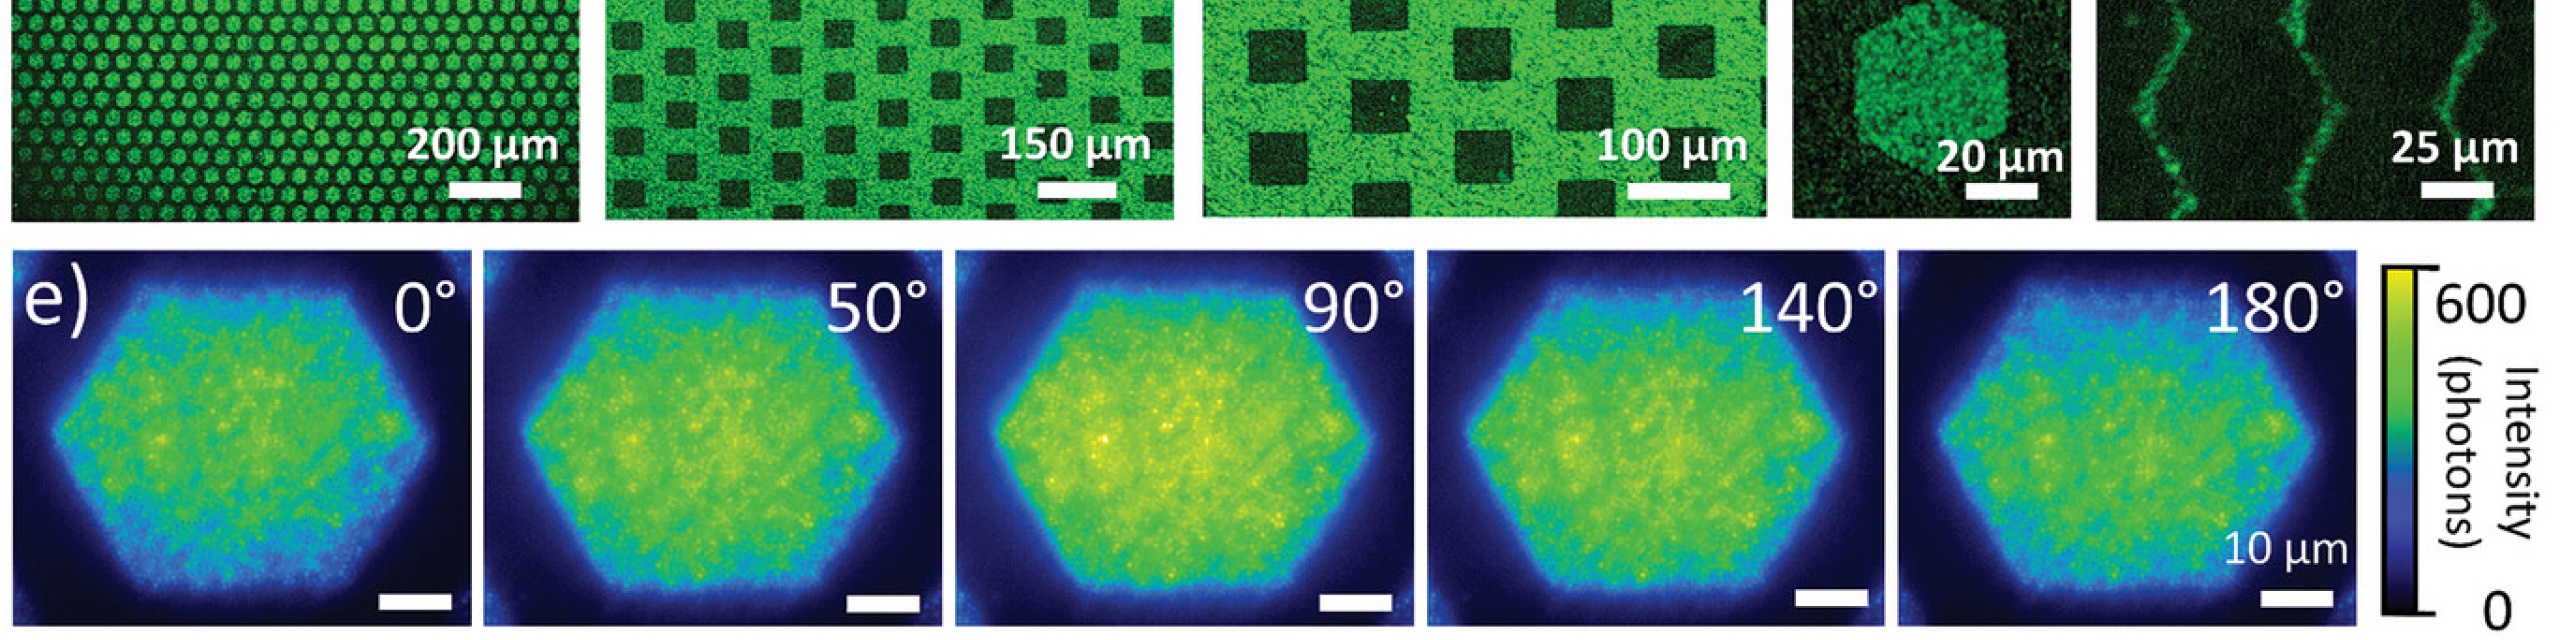 Fabrication of 3D Oriented MOF Micropatterns with Anisotropic Fluorescent...